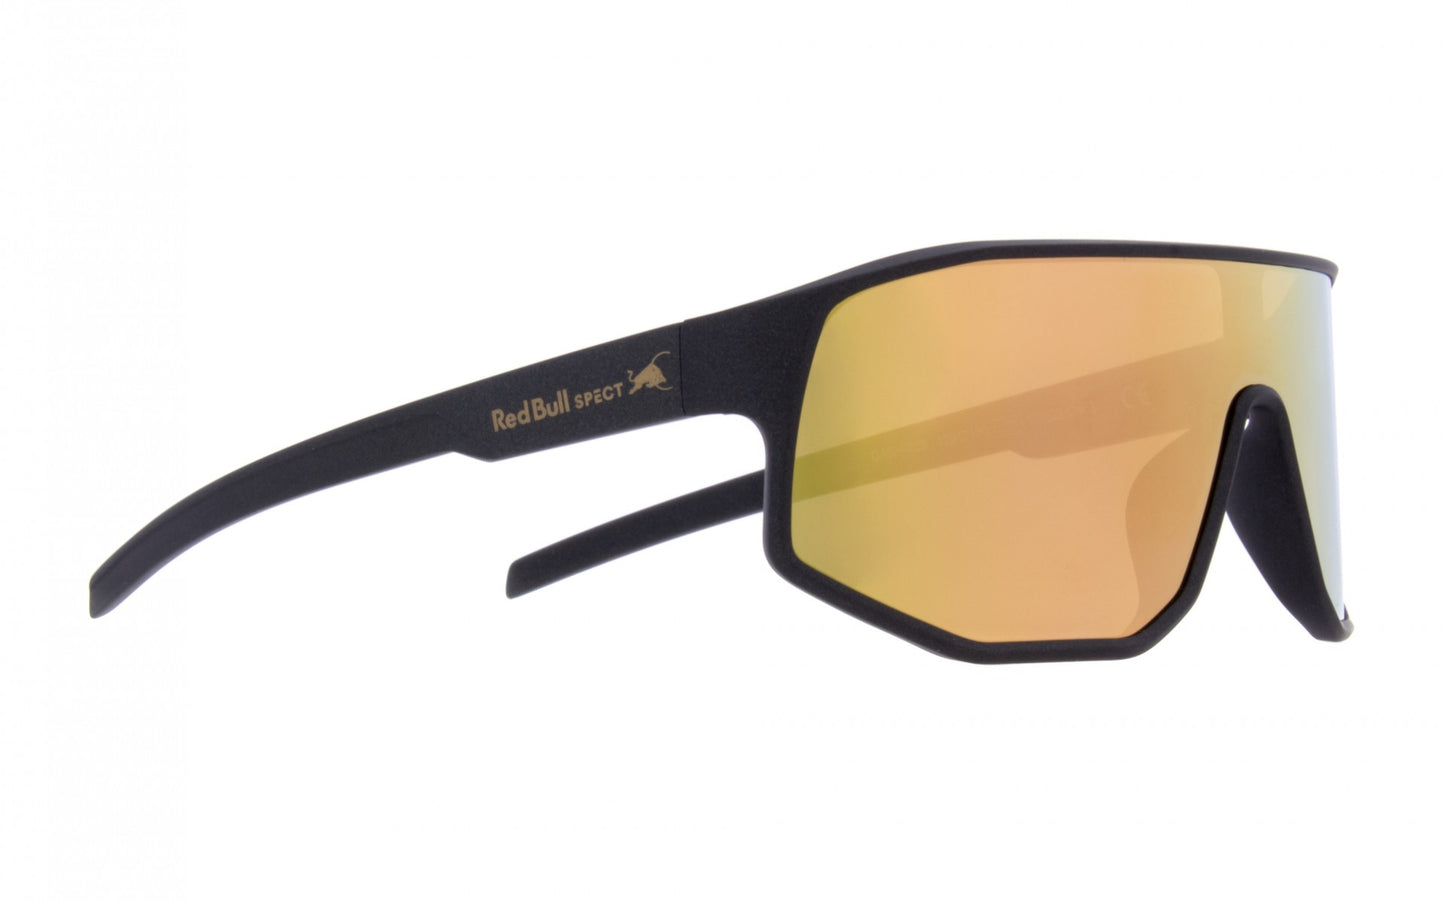 red bull spect sunglasses, dash-002, green/green with gold mirror, cat 3, 129-130 RED BULL SPECT DASH-002, green/green with gold